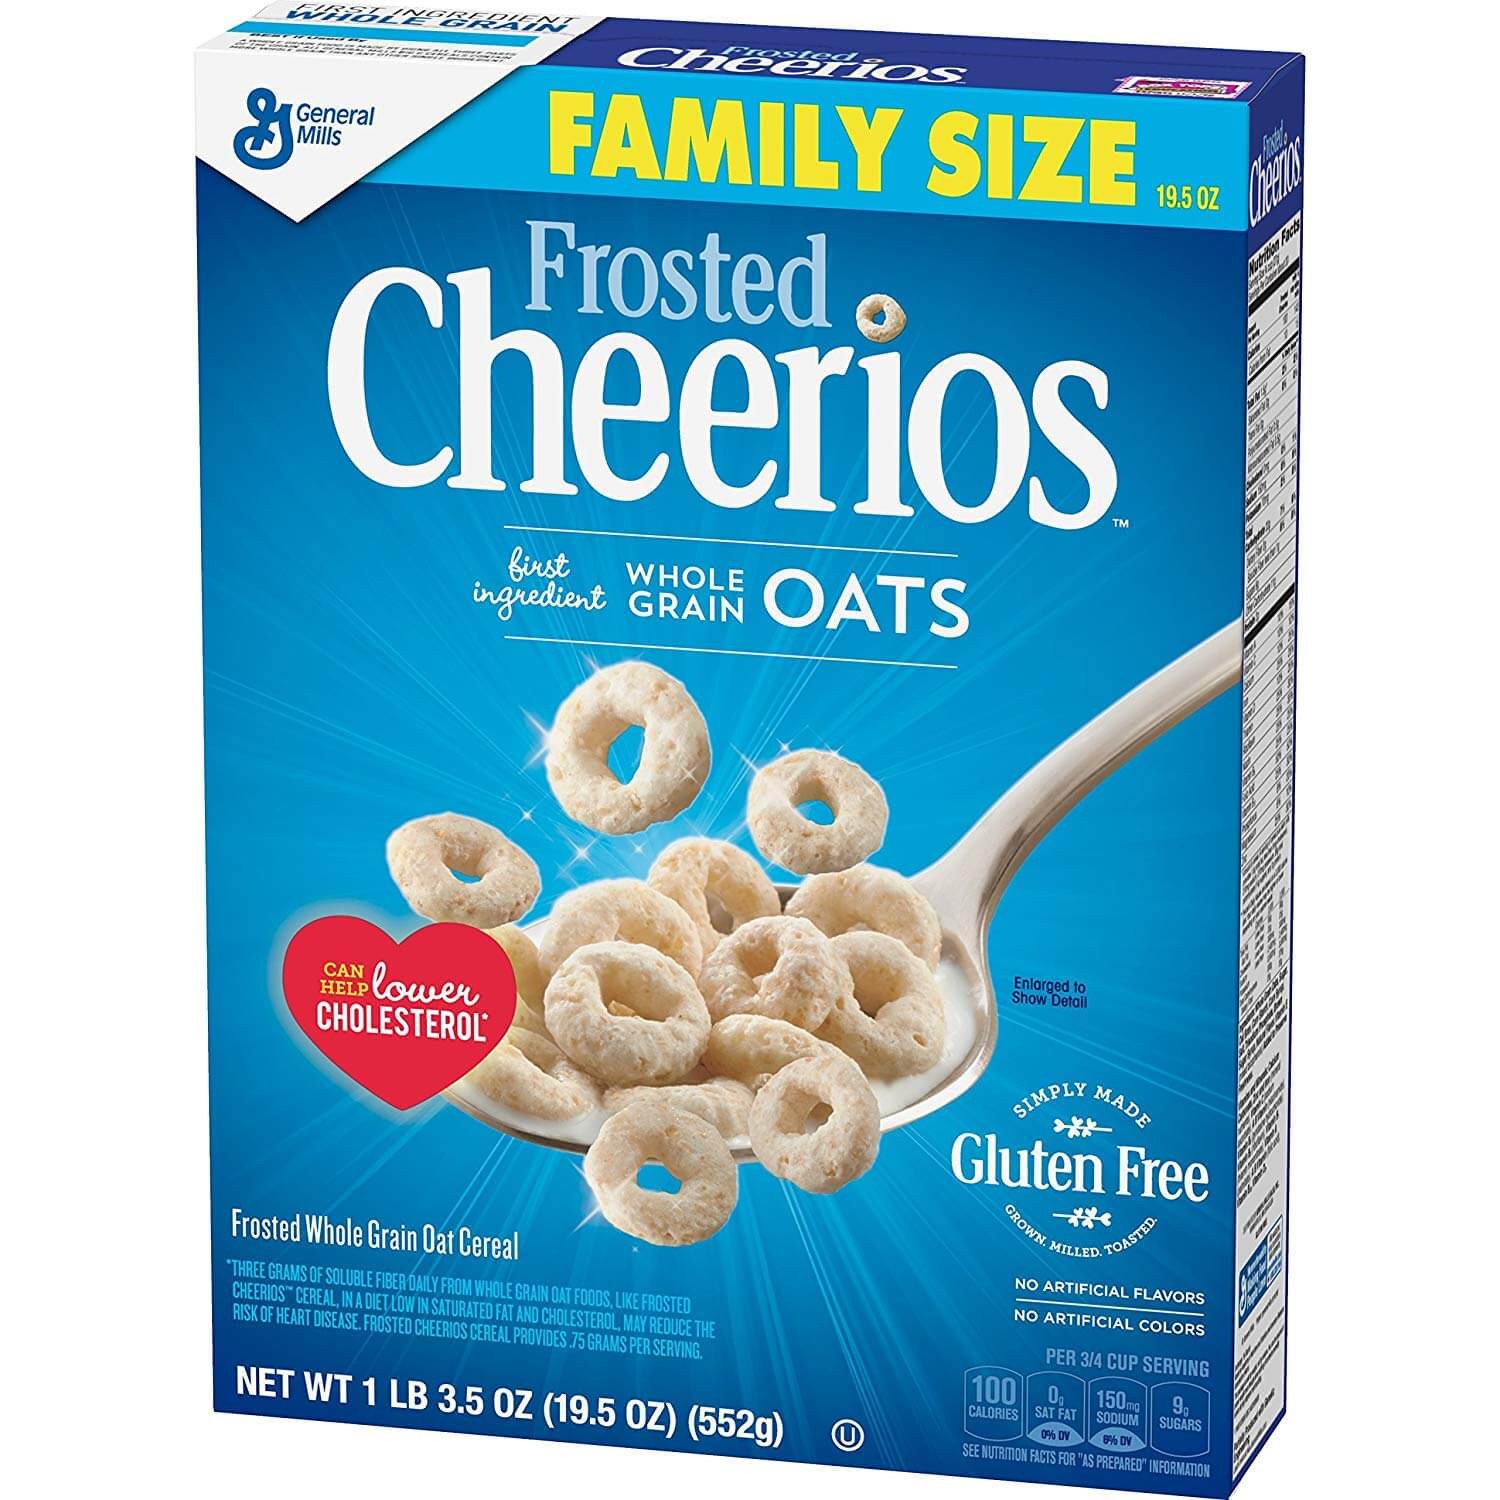 Frosted Cheerios Gluten Free Cereal by General Mills Cereal